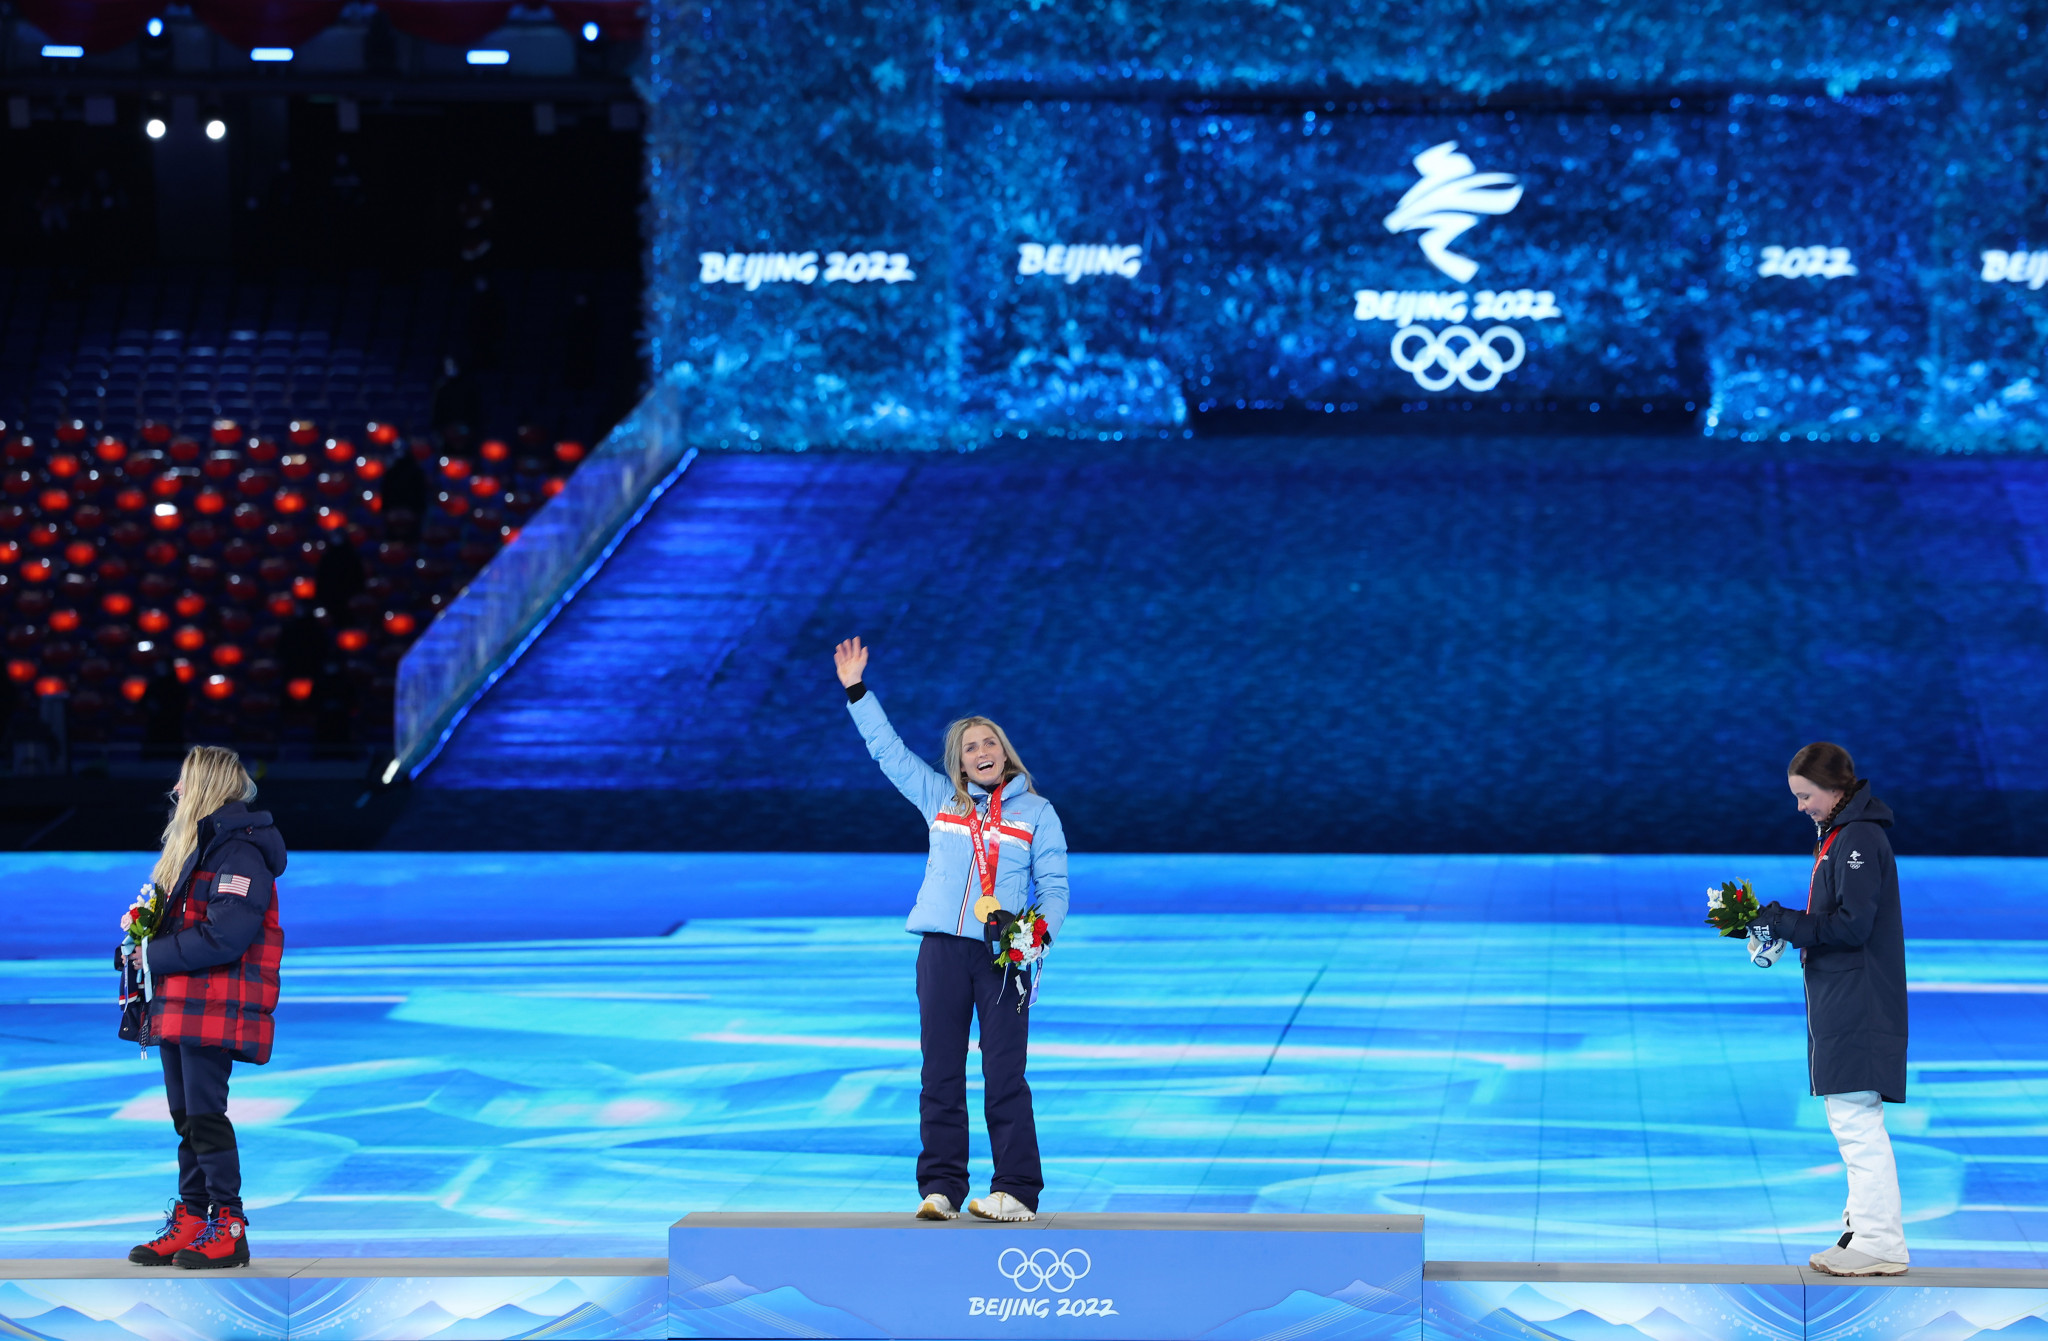 Norway's Therese Johaug was given her third gold medal of Beijing 2022 during the Closing Ceremony ©Getty Images